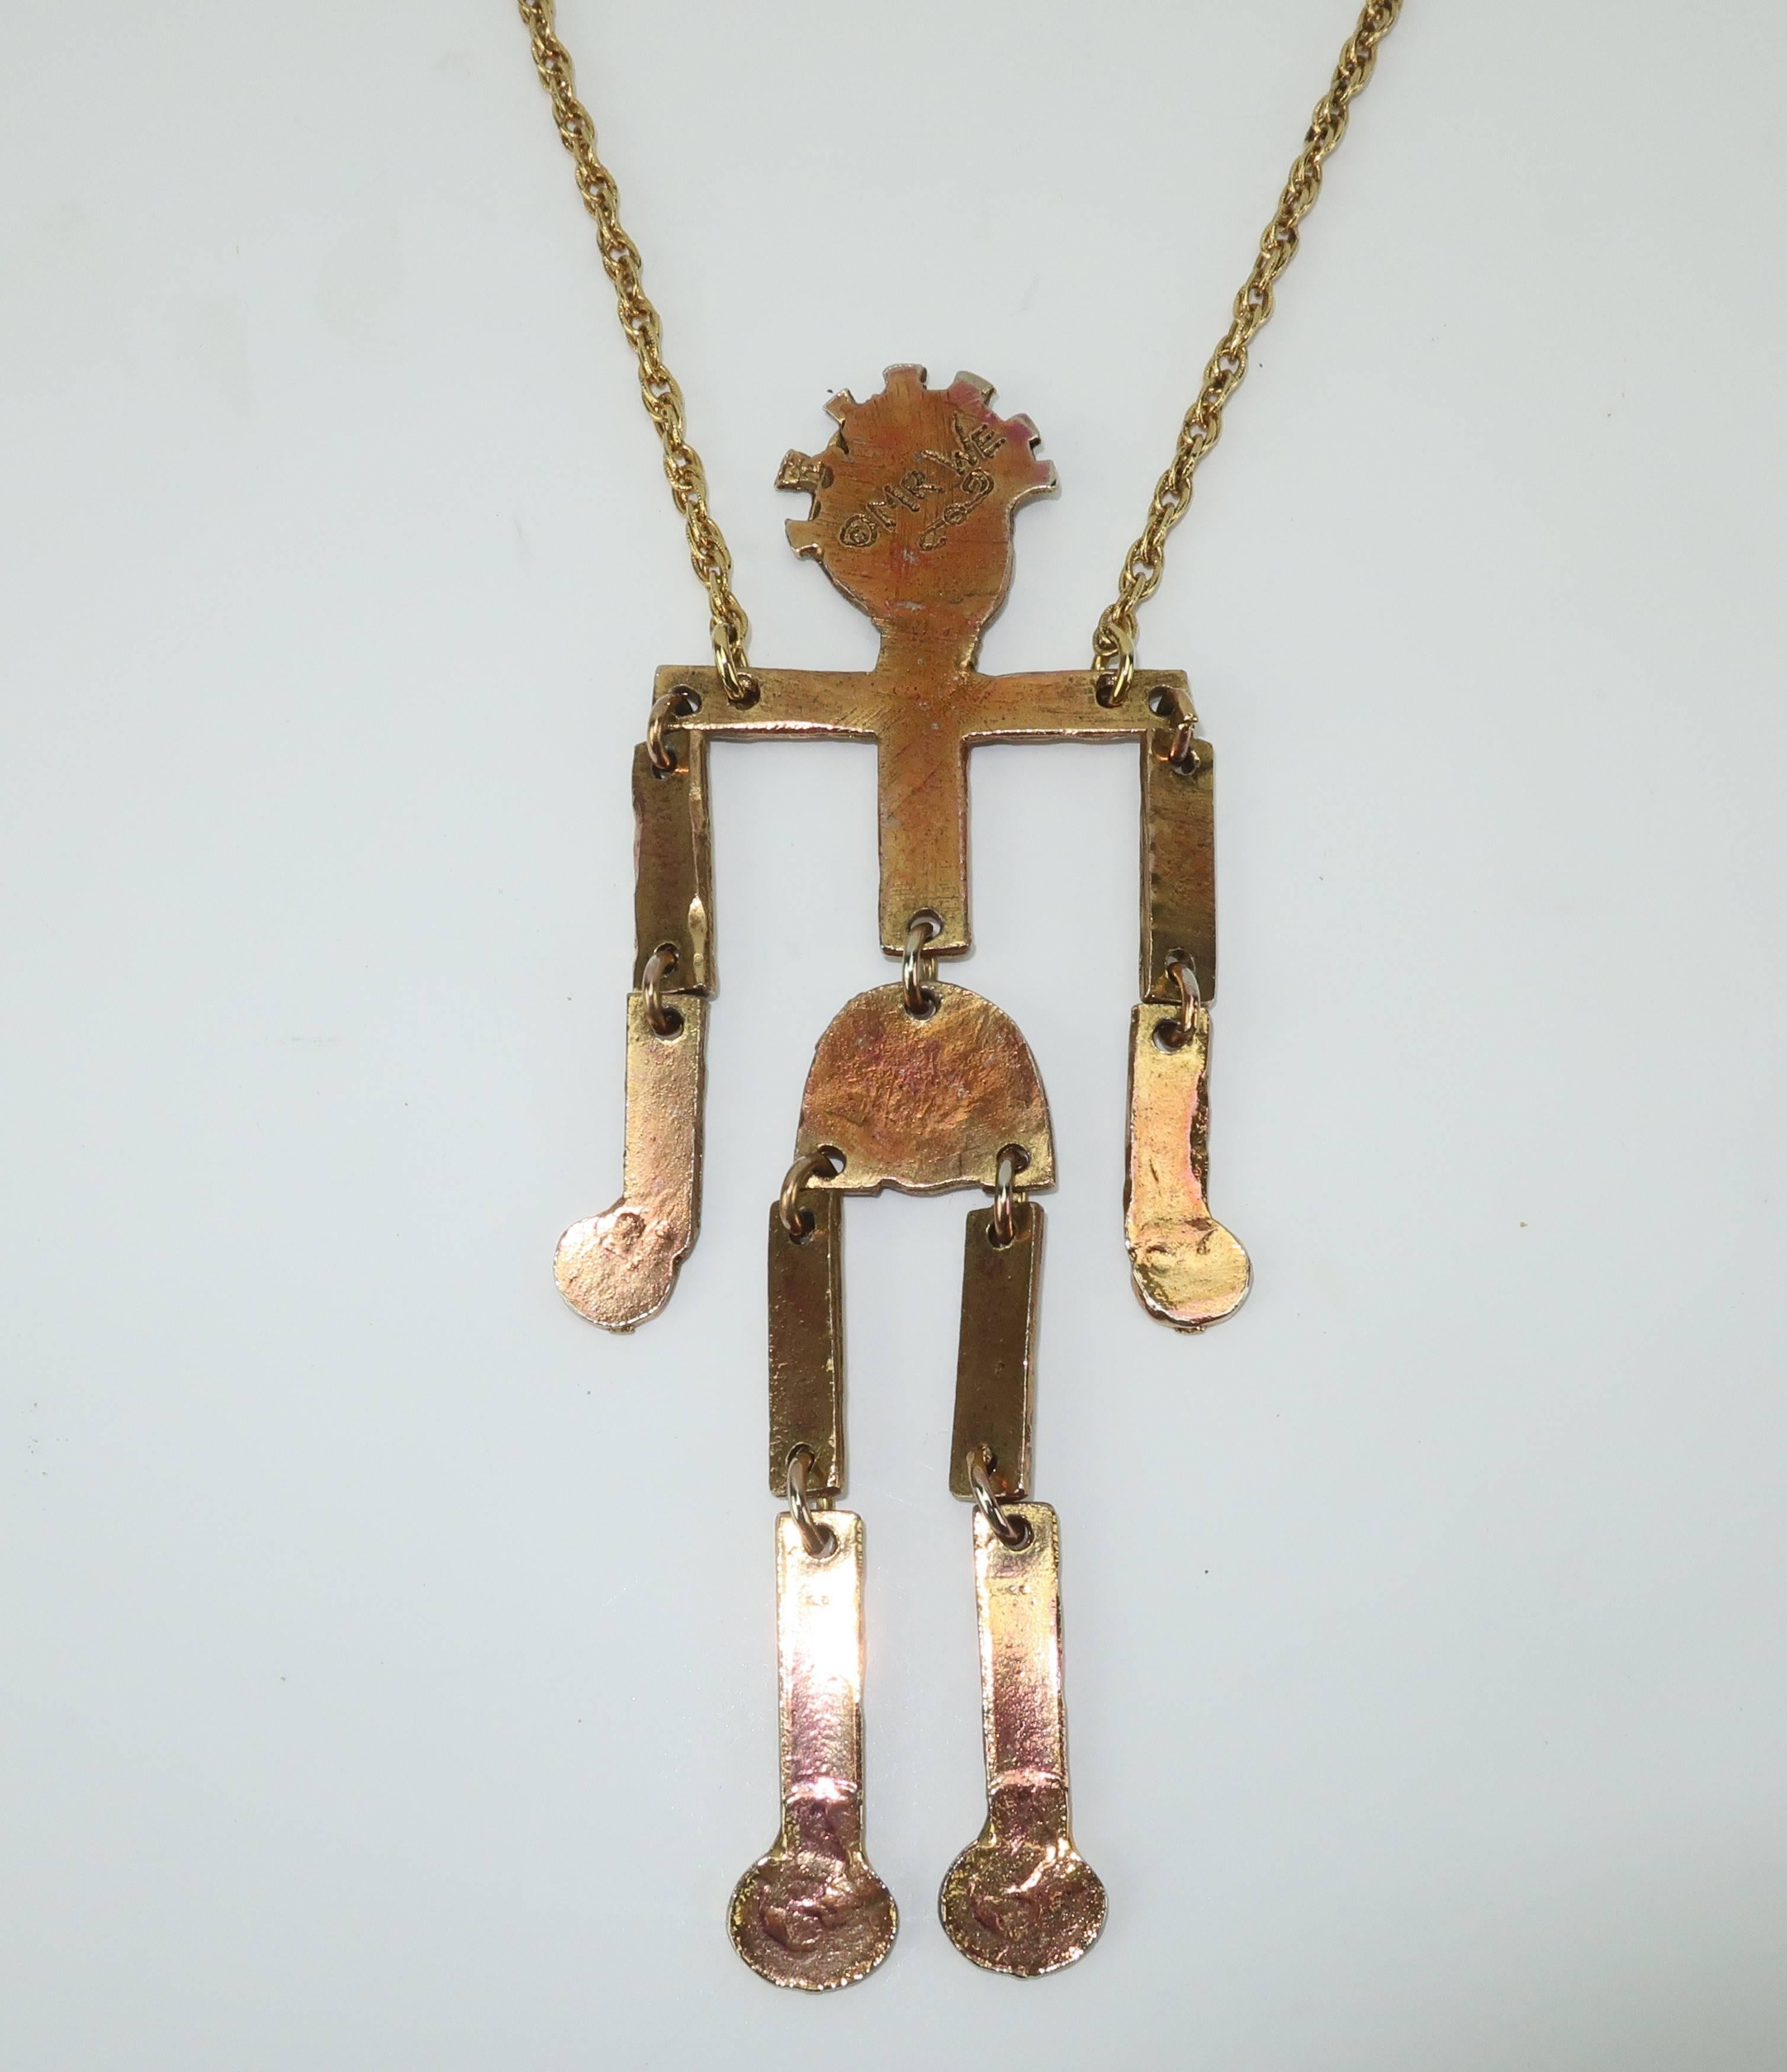 C.1970 Mr. We Articulated Man Pendant Necklace 1